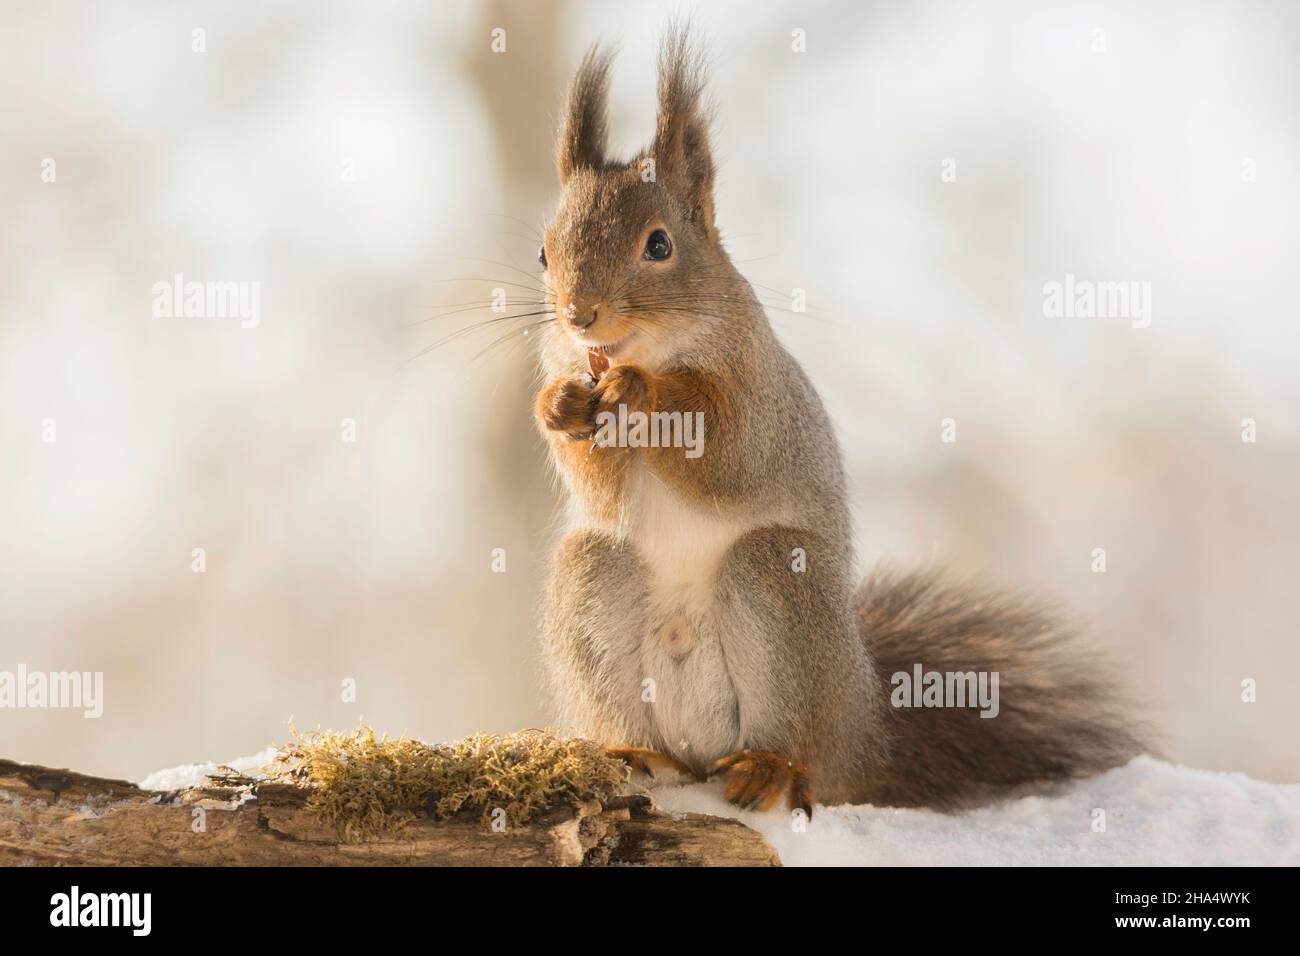 profile and close up of red squirrel with happy face Stock Photo